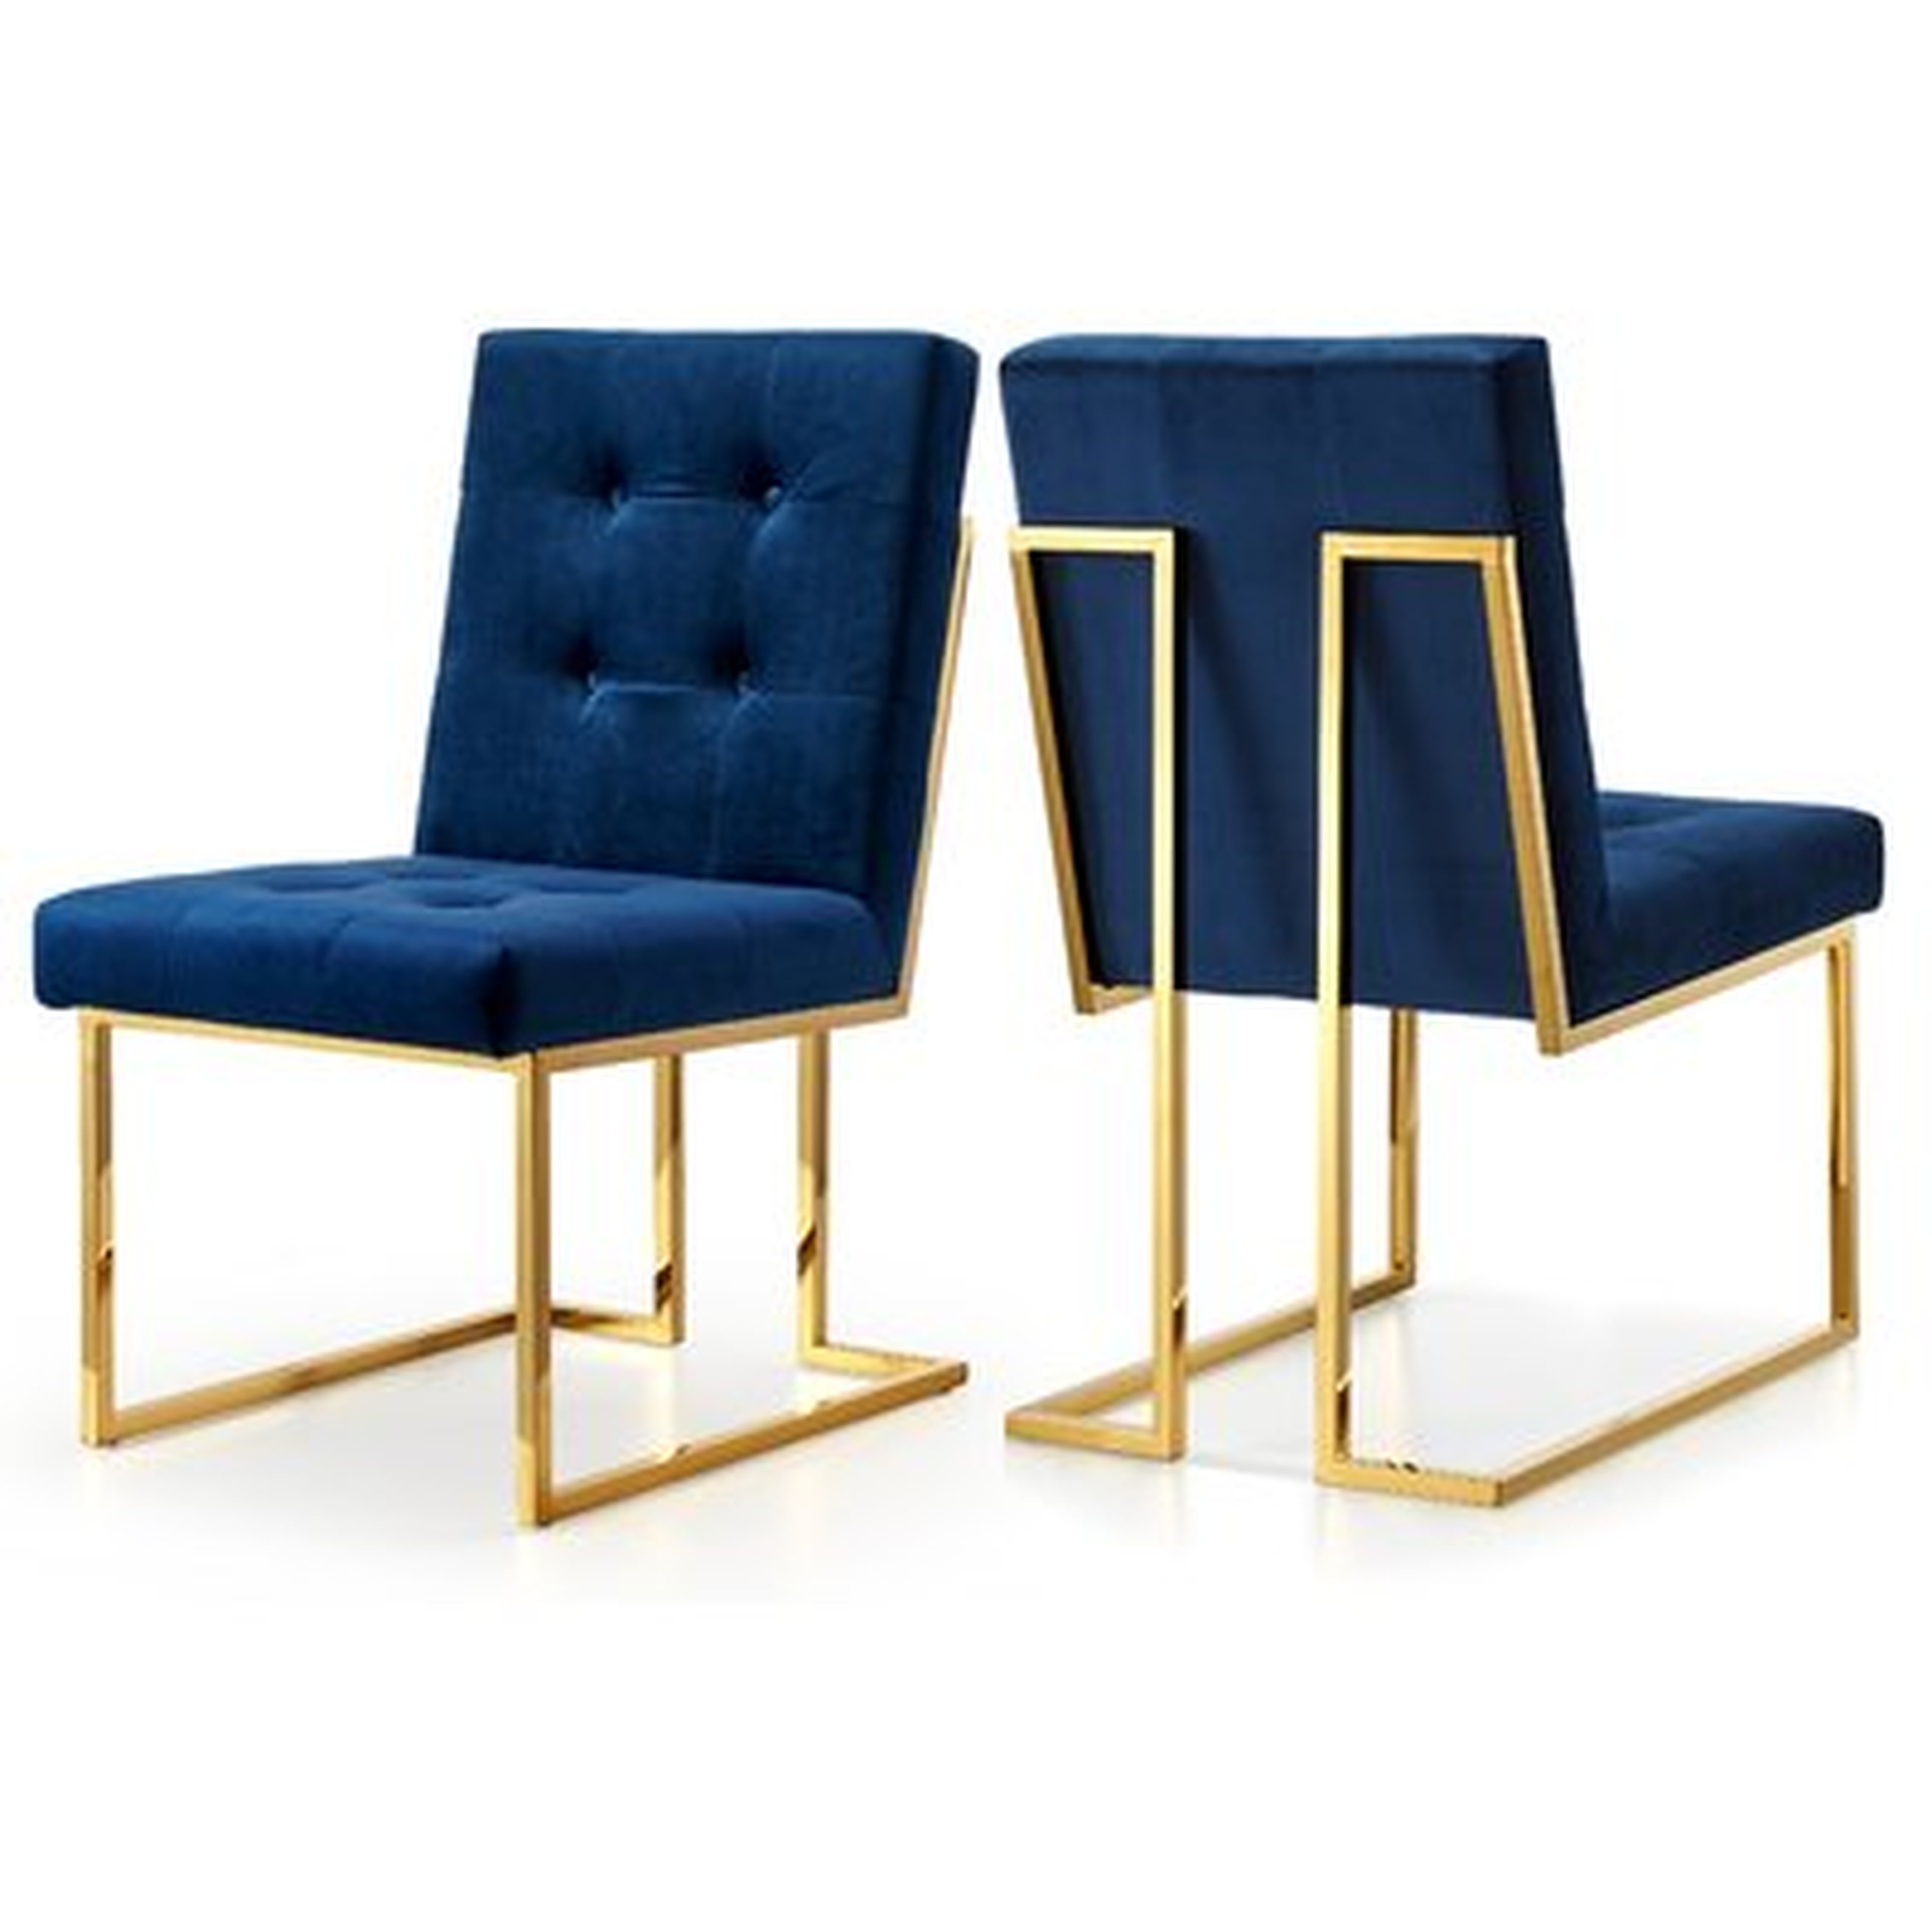 Robey Upholstery Dining Chair (set of 2) - Wayfair